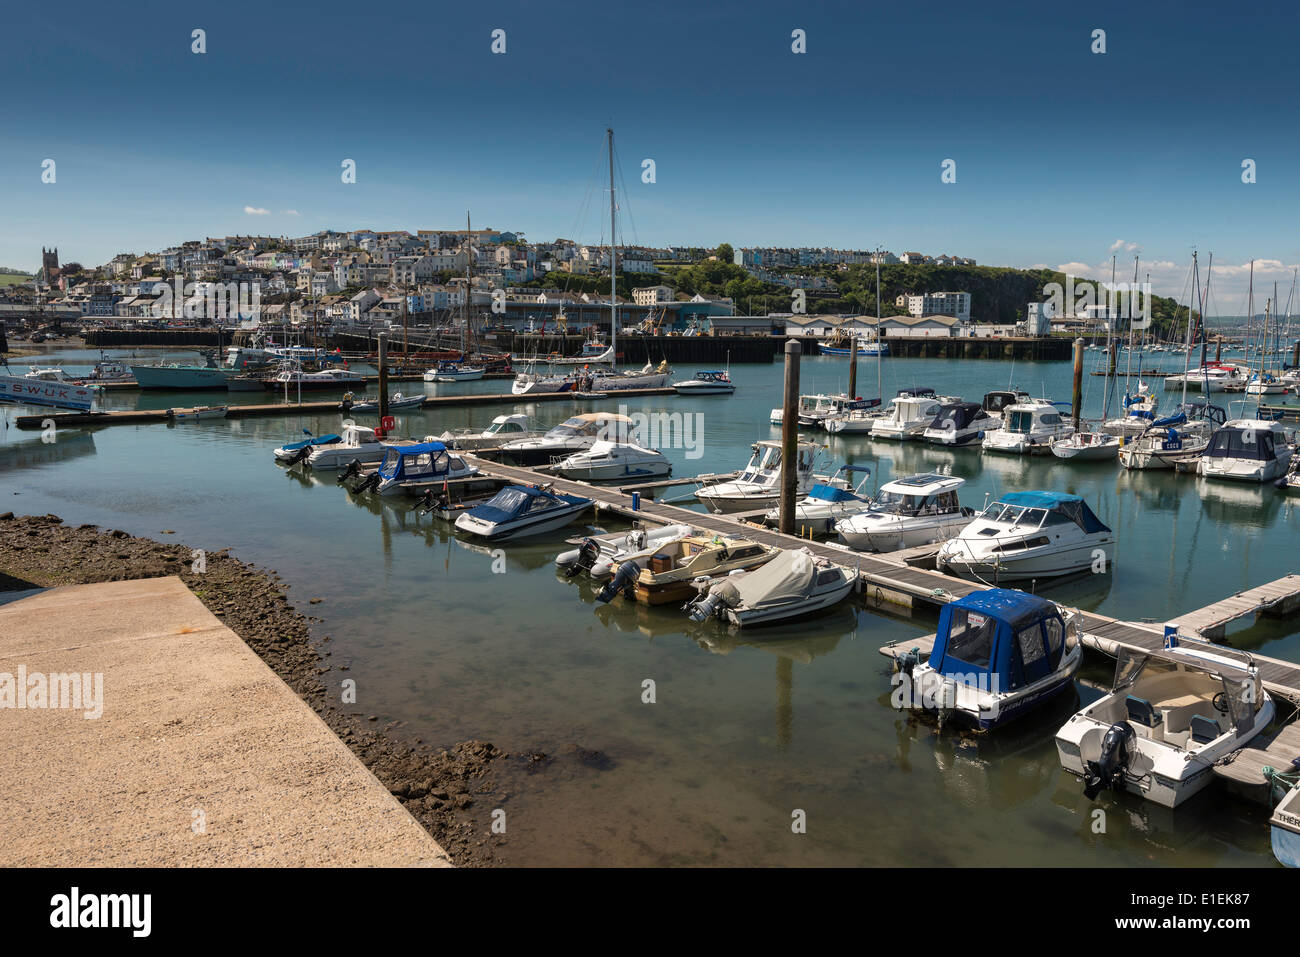 Yachts and boats moored at pontoons in Brixham harbour/marina in summertime. Devon, West of England UK Stock Photo